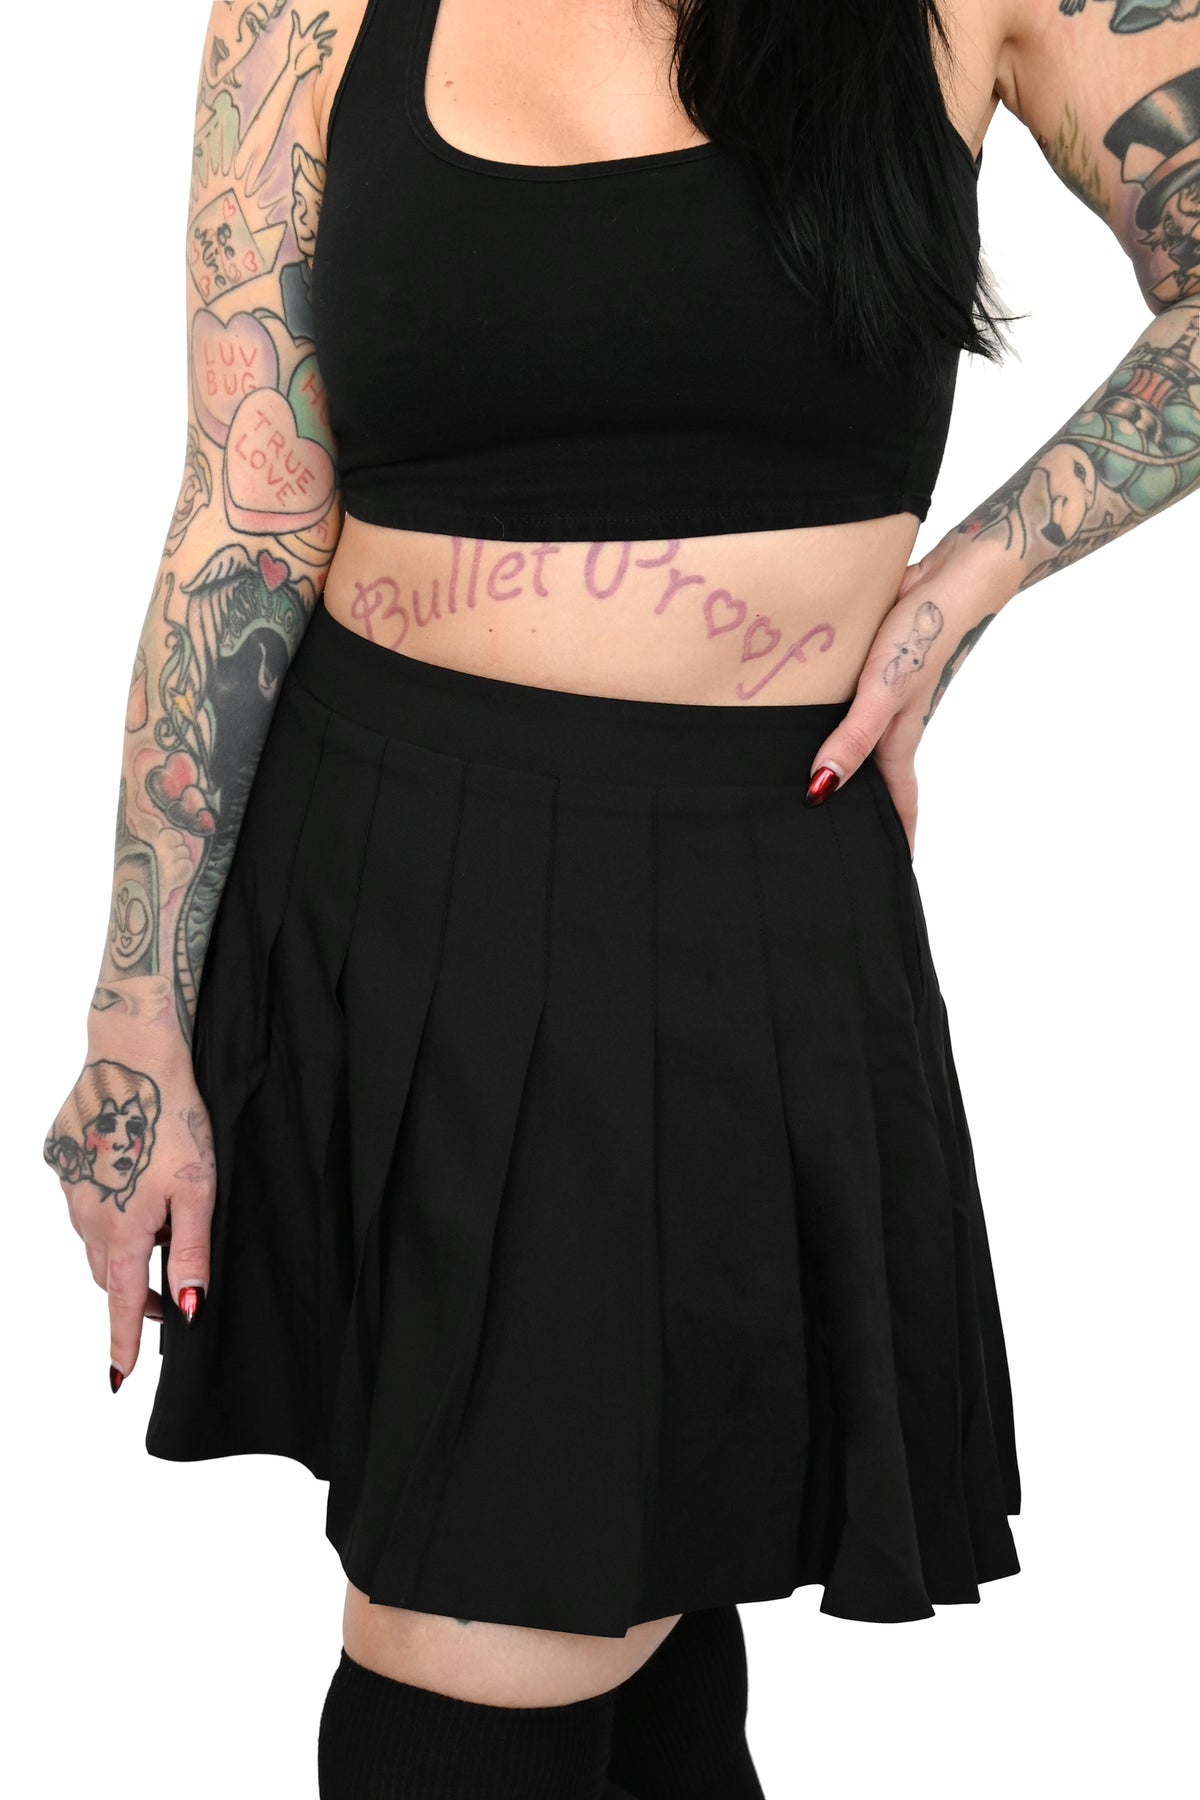 Gogo Pleated Skirt with Built in Shorts XS & Small left!- No Restock –  FOXBLOOD